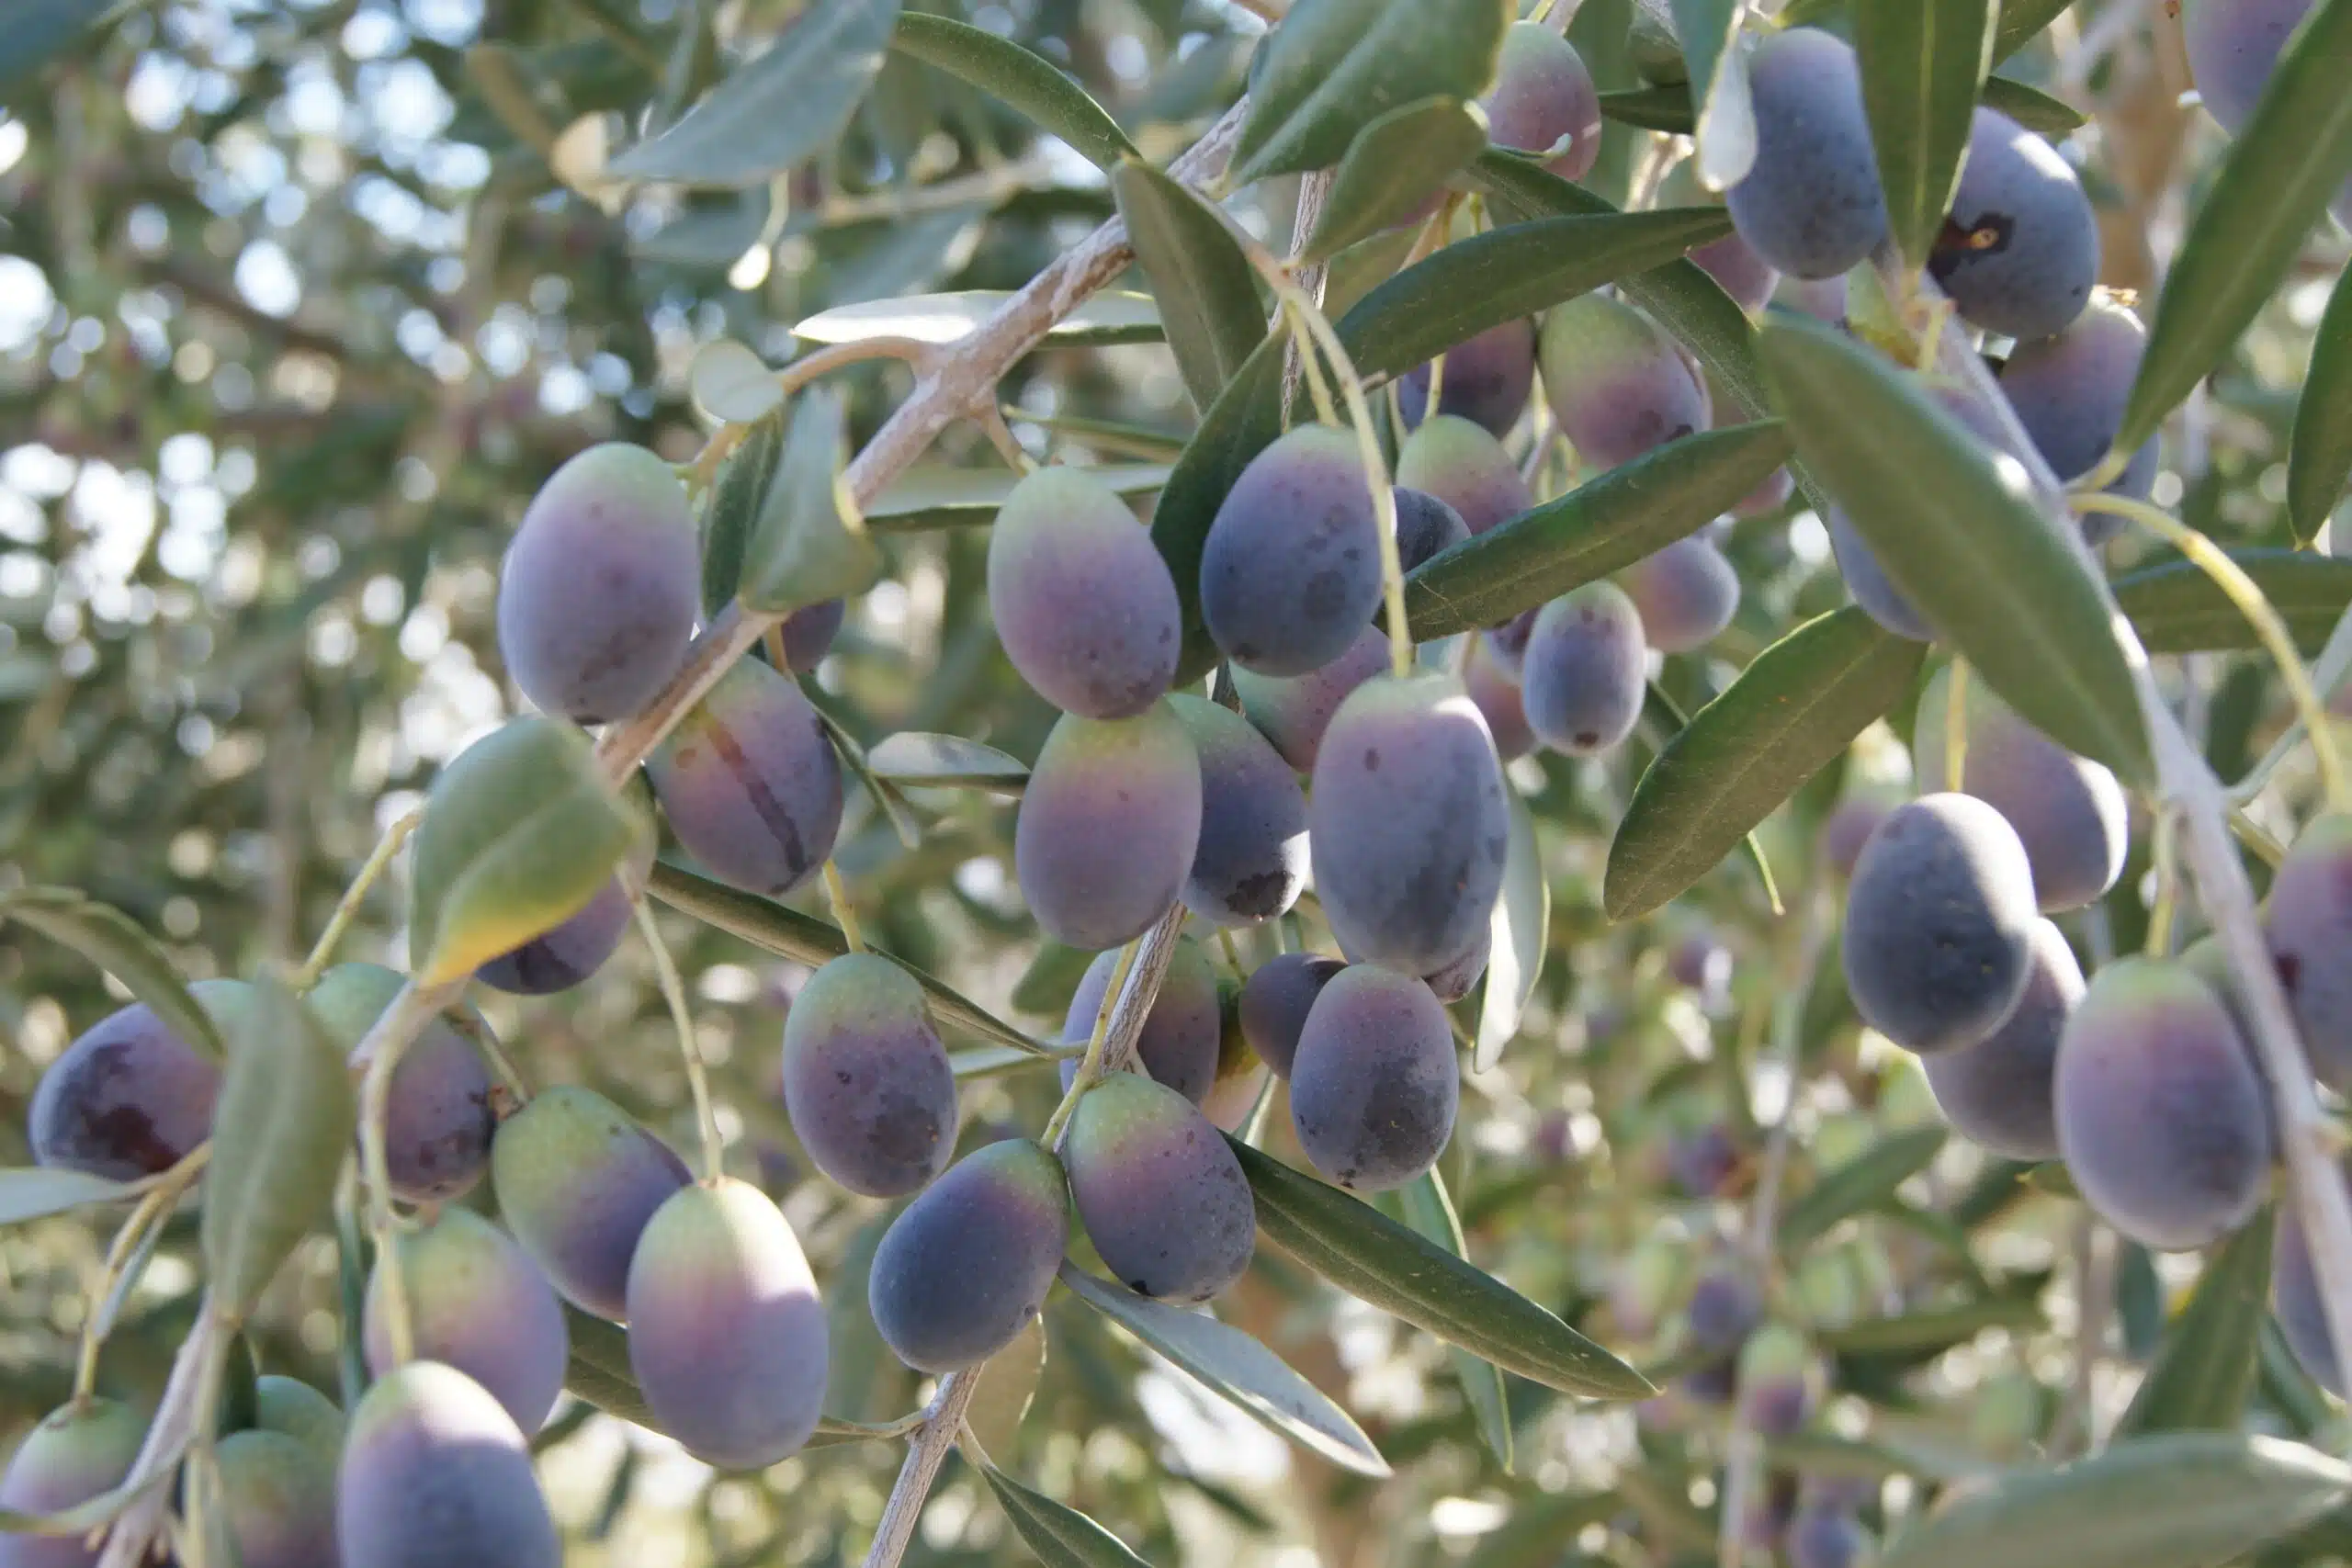 The Algarve is the Perfect Location for Growing Olive Trees
